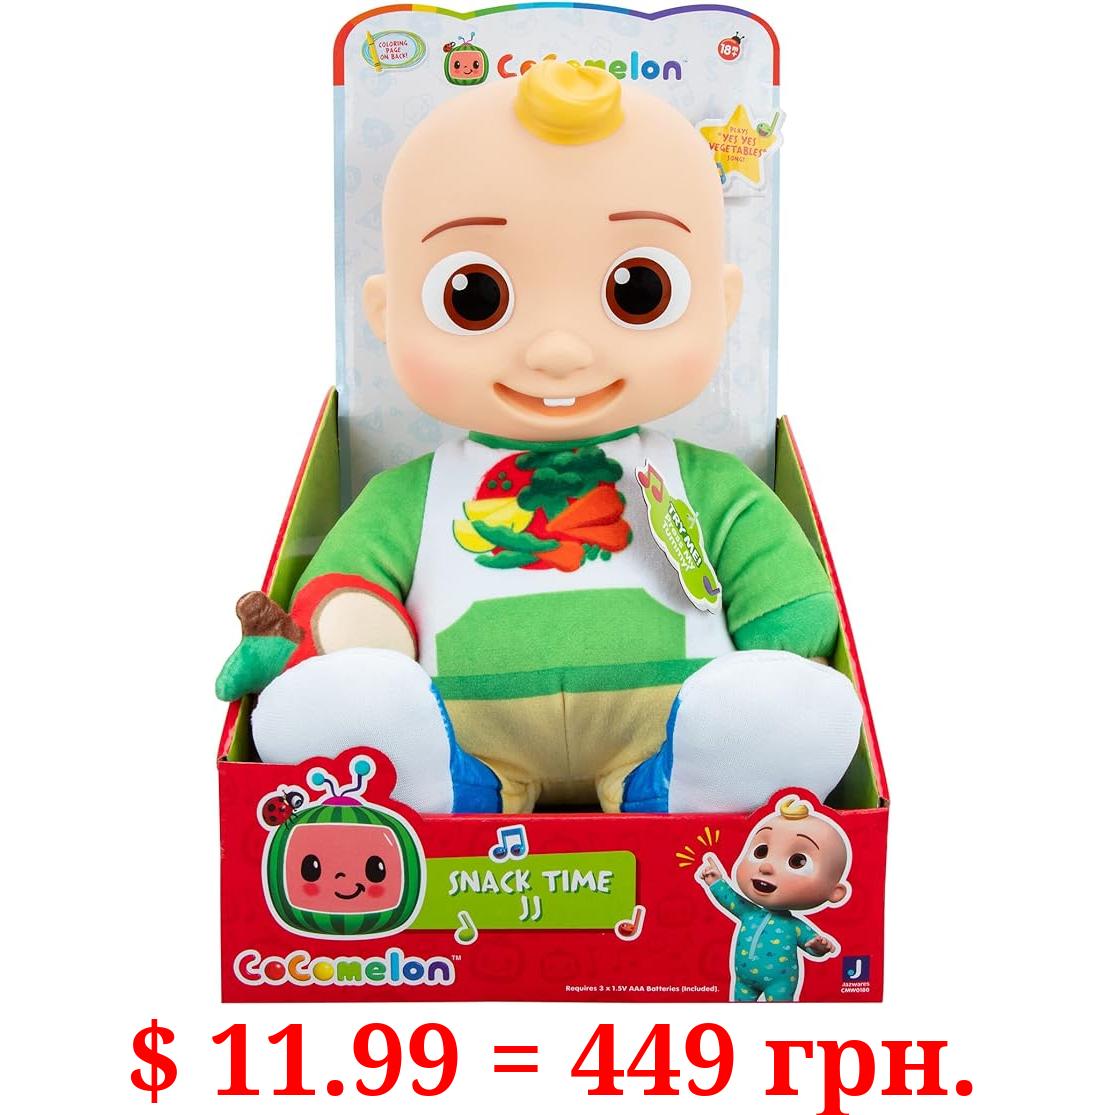 Cocomelon Snack Time JJ Plush Doll - Features JJ Doll with Red Apple Plush - Plays Sounds, Phrases, and Clips of ‘Yes Yes Vegetables Song’ - Toys for Kids, Toddlers and Preschoolers